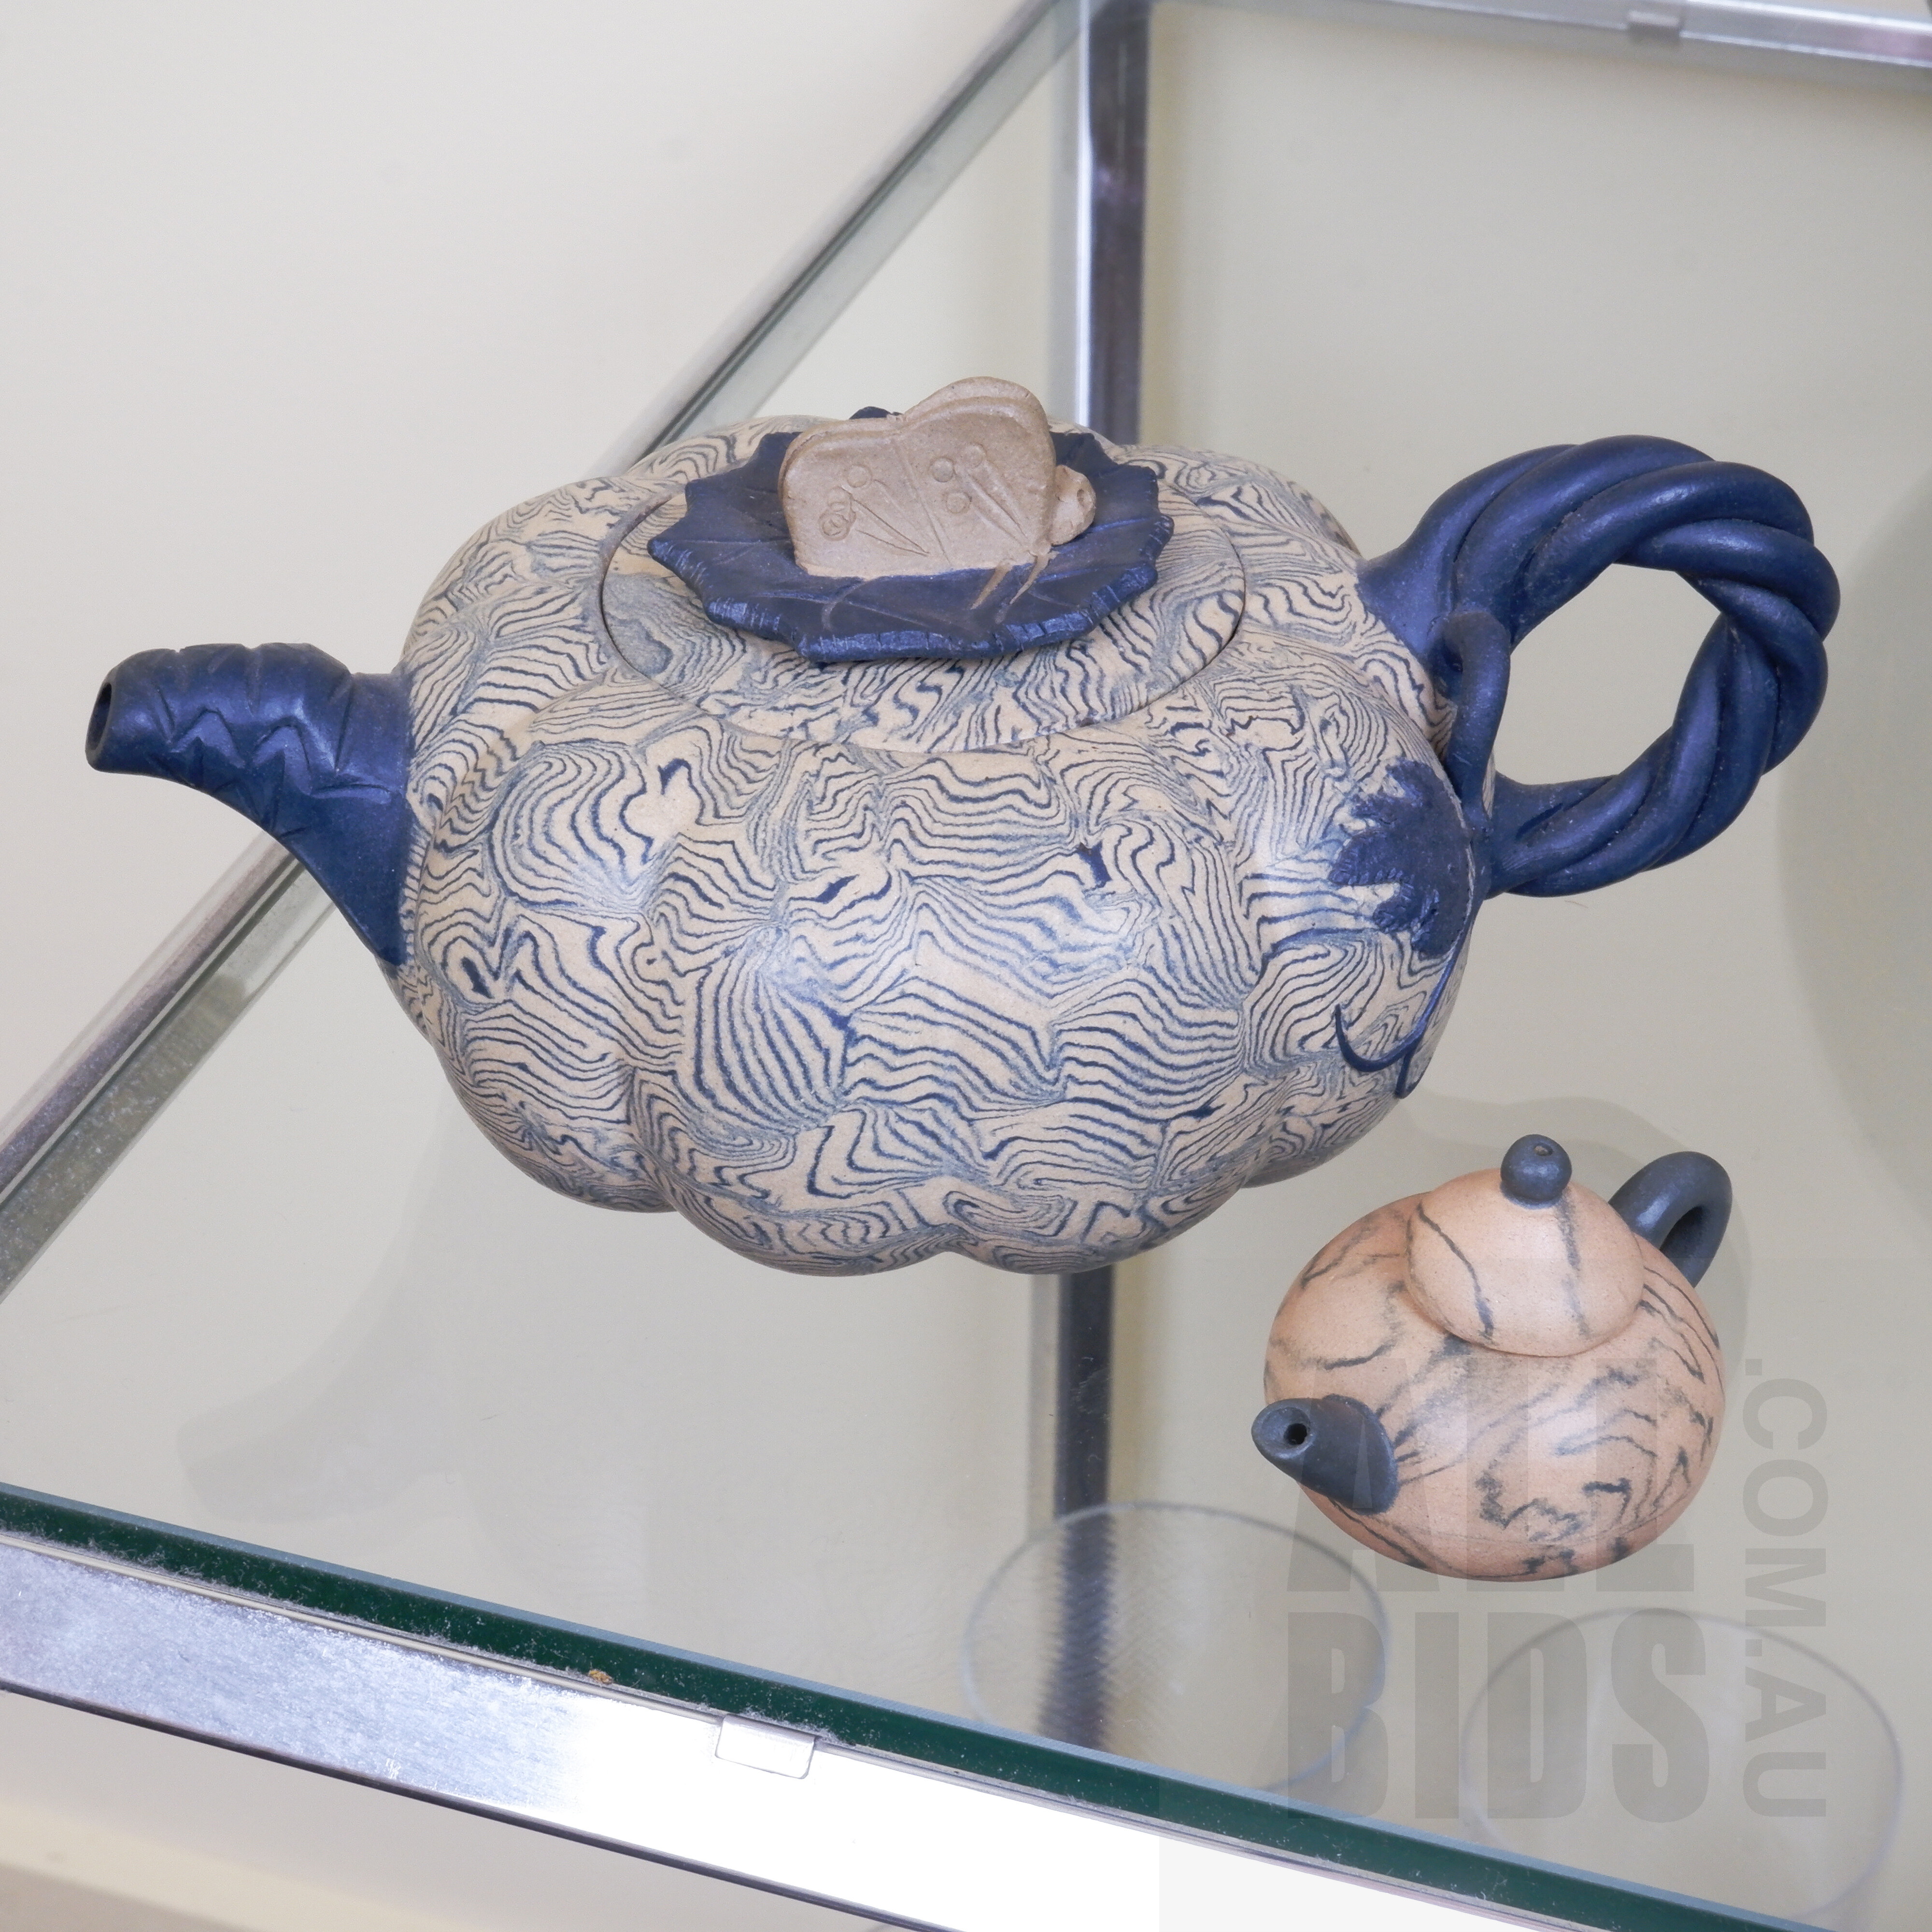 'Chinese Yixing Teapot With Marbled Glaze and Another Miniature Teapot'